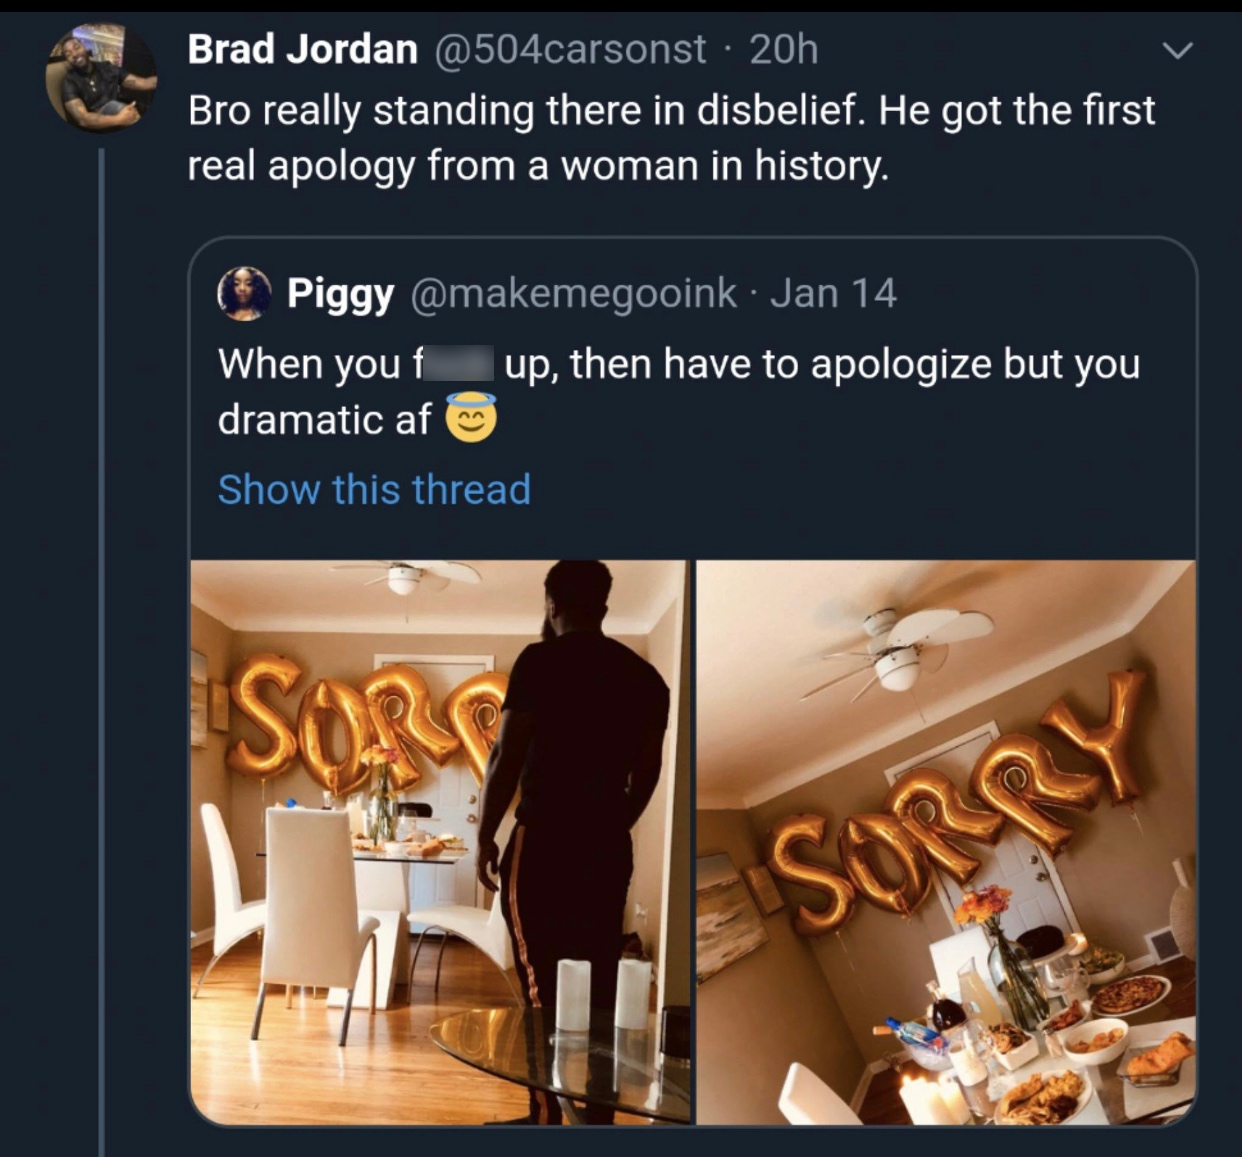 presentation - Brad Jordan 20h Bro really standing there in disbelief. He got the first real apology from a woman in history. Piggy Jan 14 When you f up, then have to apologize but you dramatic af Show this thread Sorg